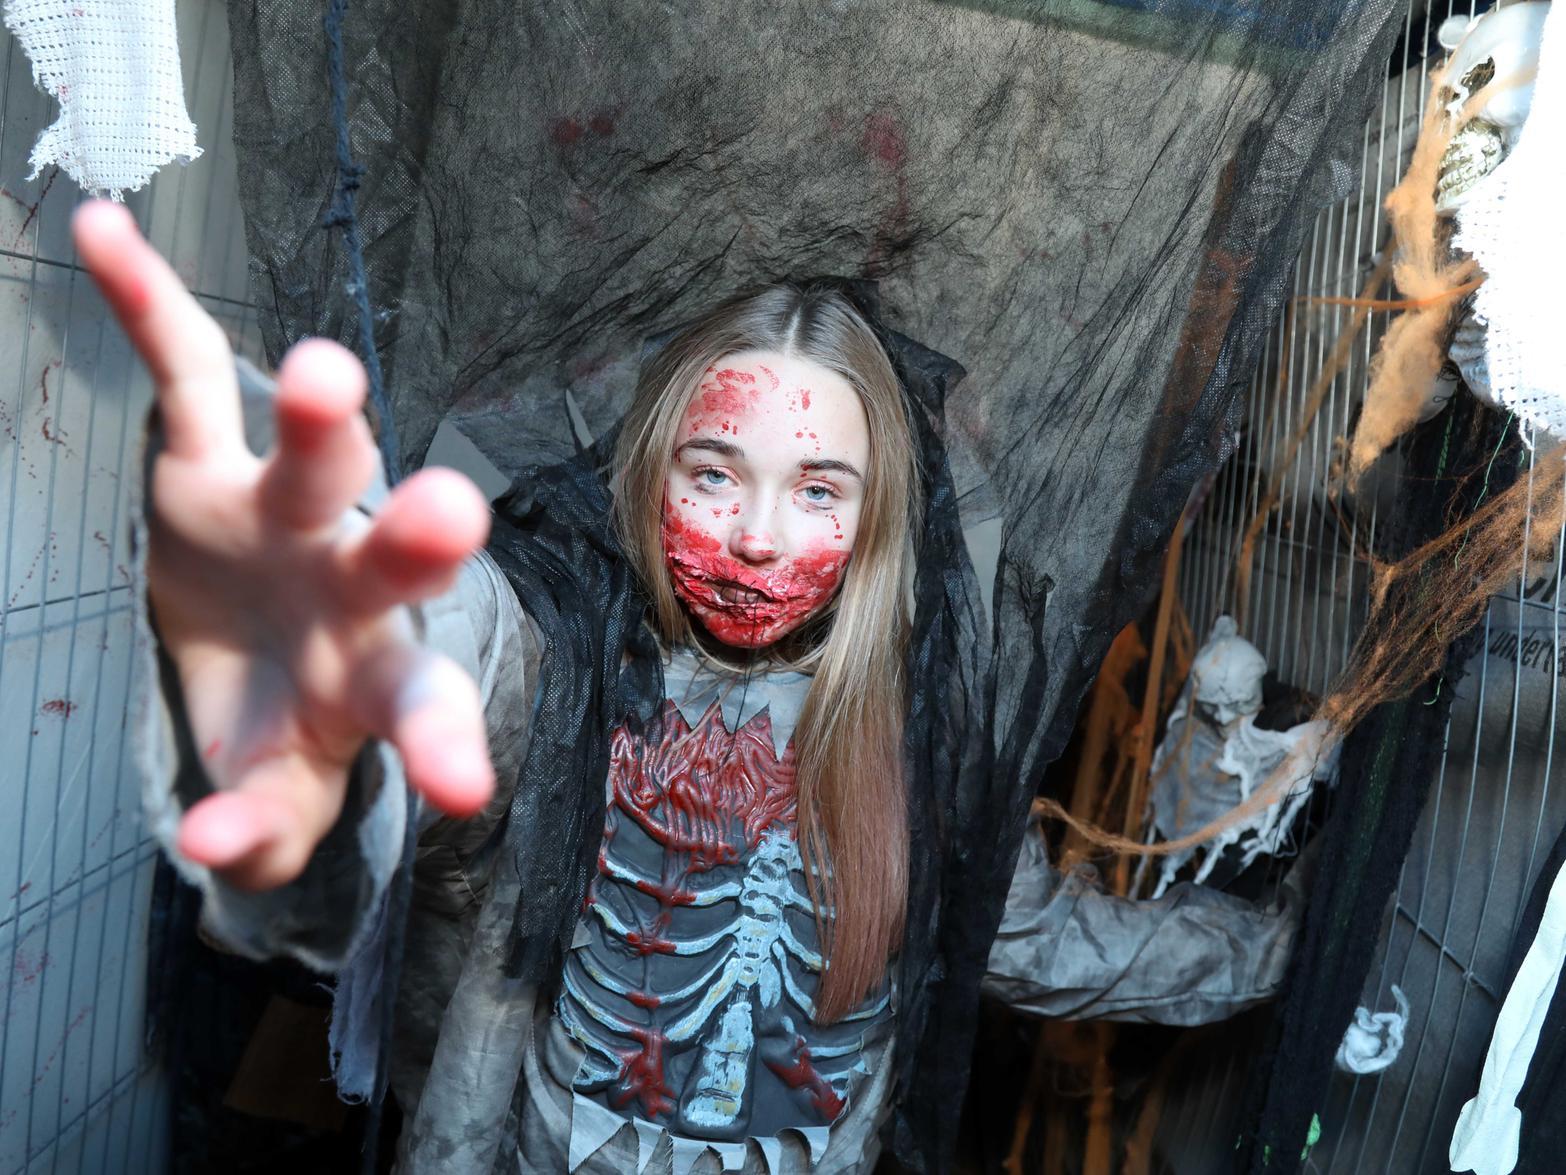 This zombie had a stitched up mouth - the make up was incredible